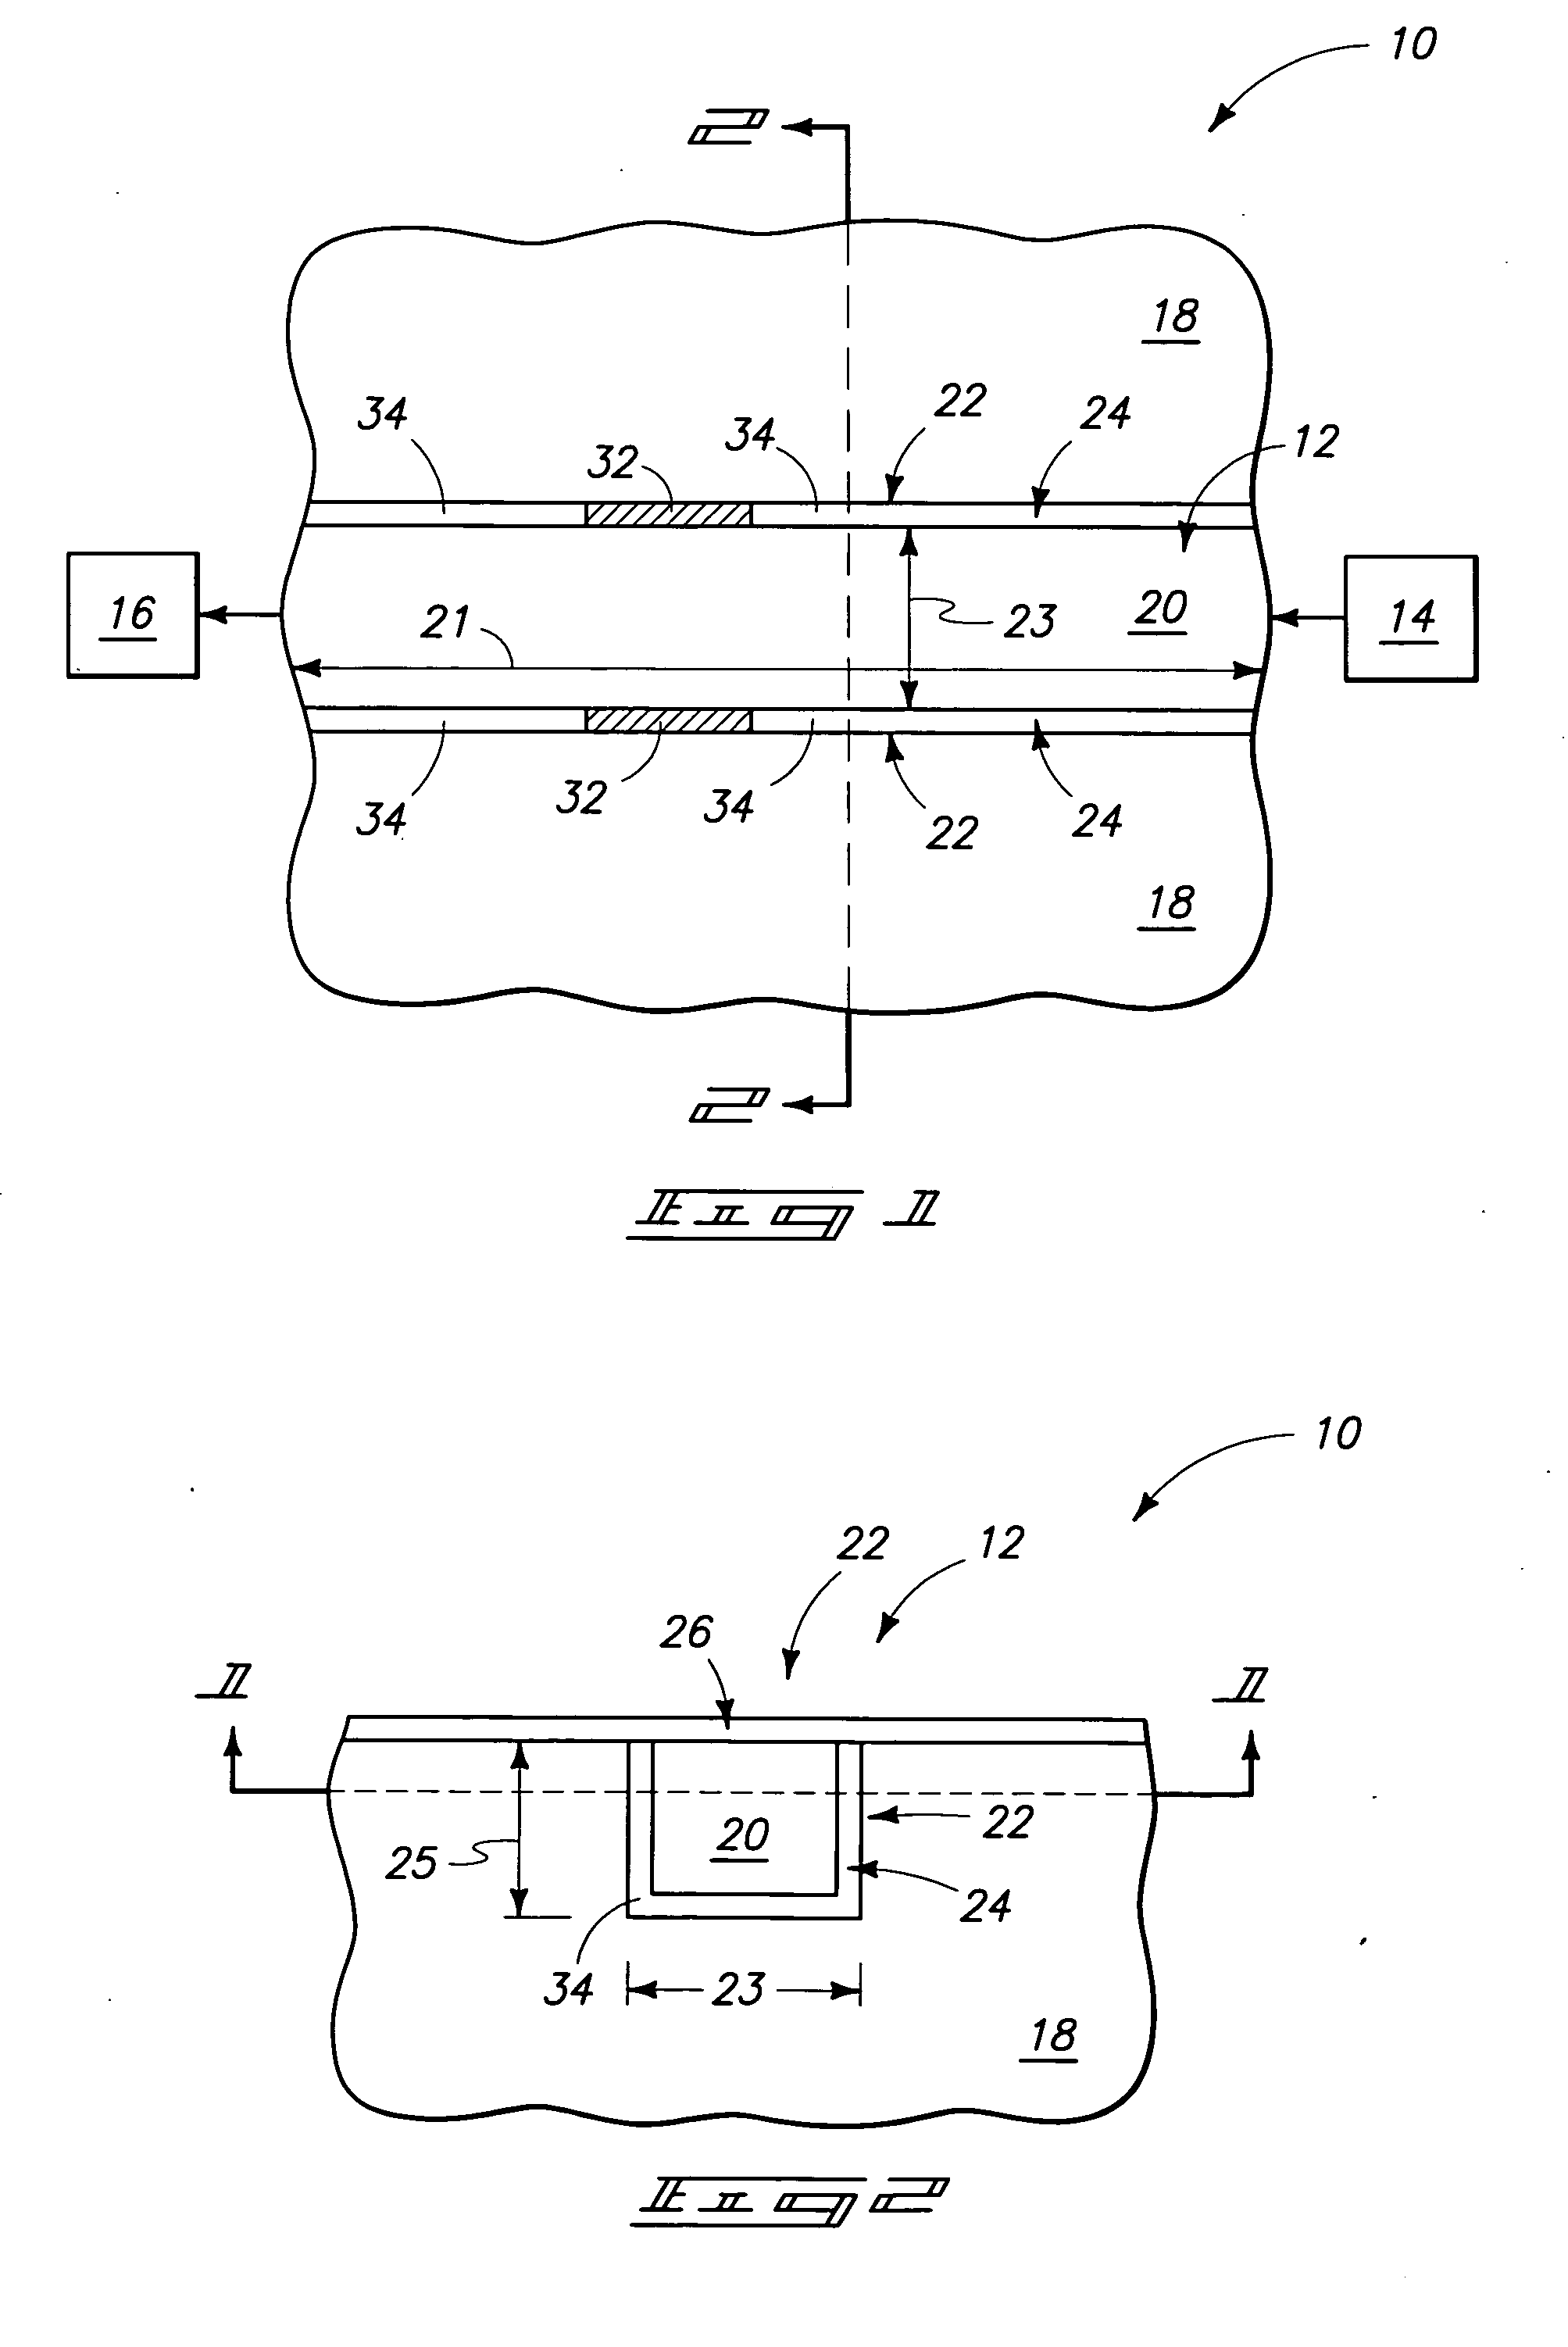 Semiconductor constructions, methods of forming semiconductor constructions, light-conducting conduits, and optical signal propagation assemblies